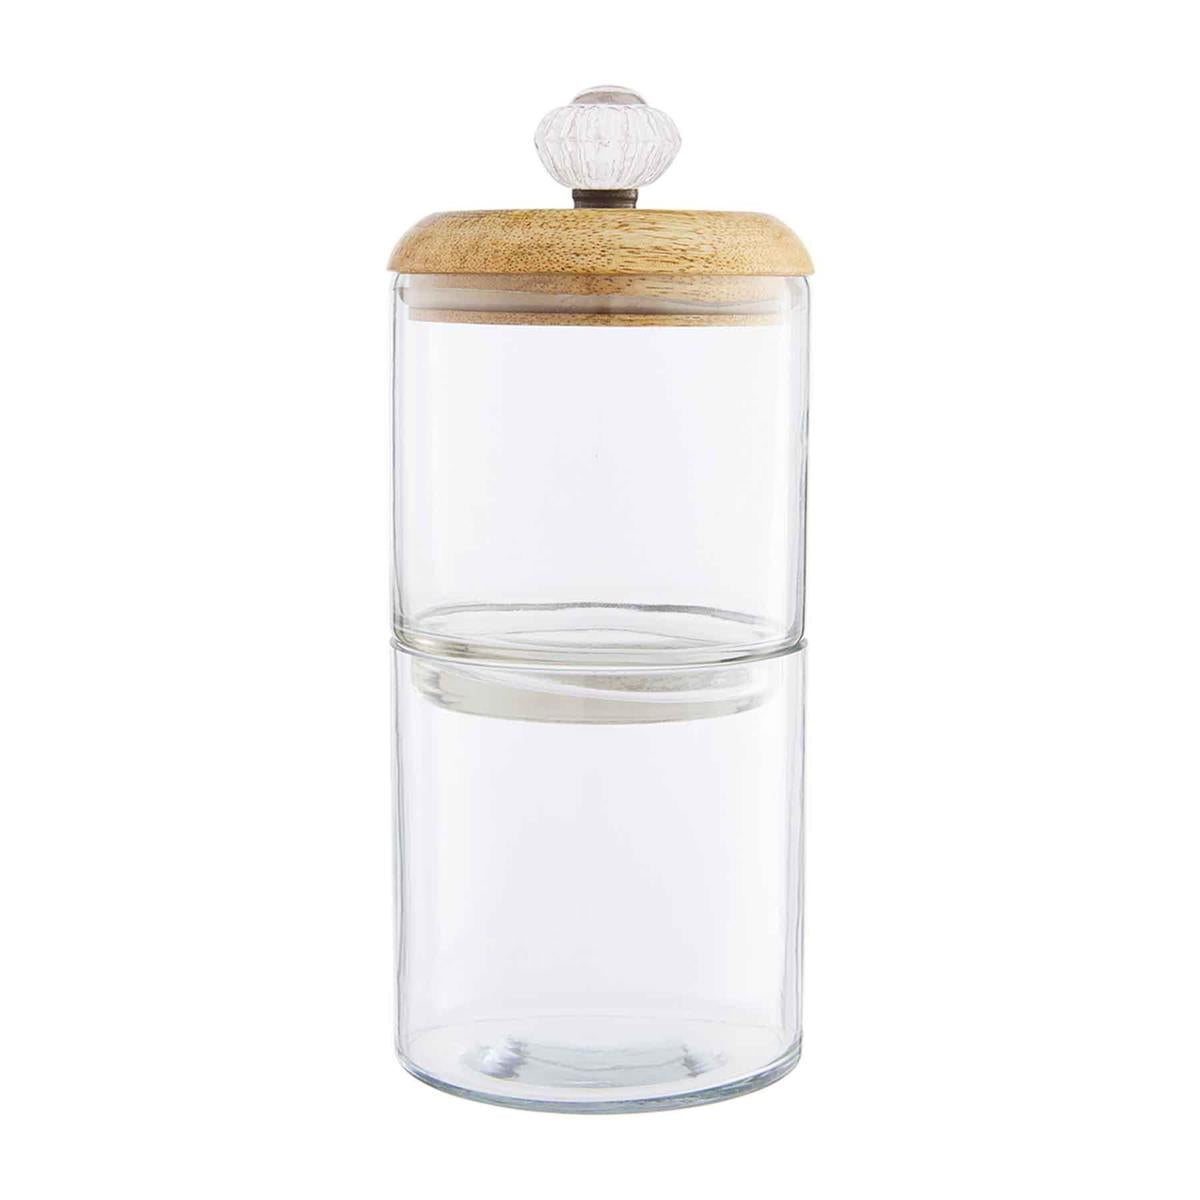 two clear glass stacked jars with a wooden lid and glass door knob on a white background